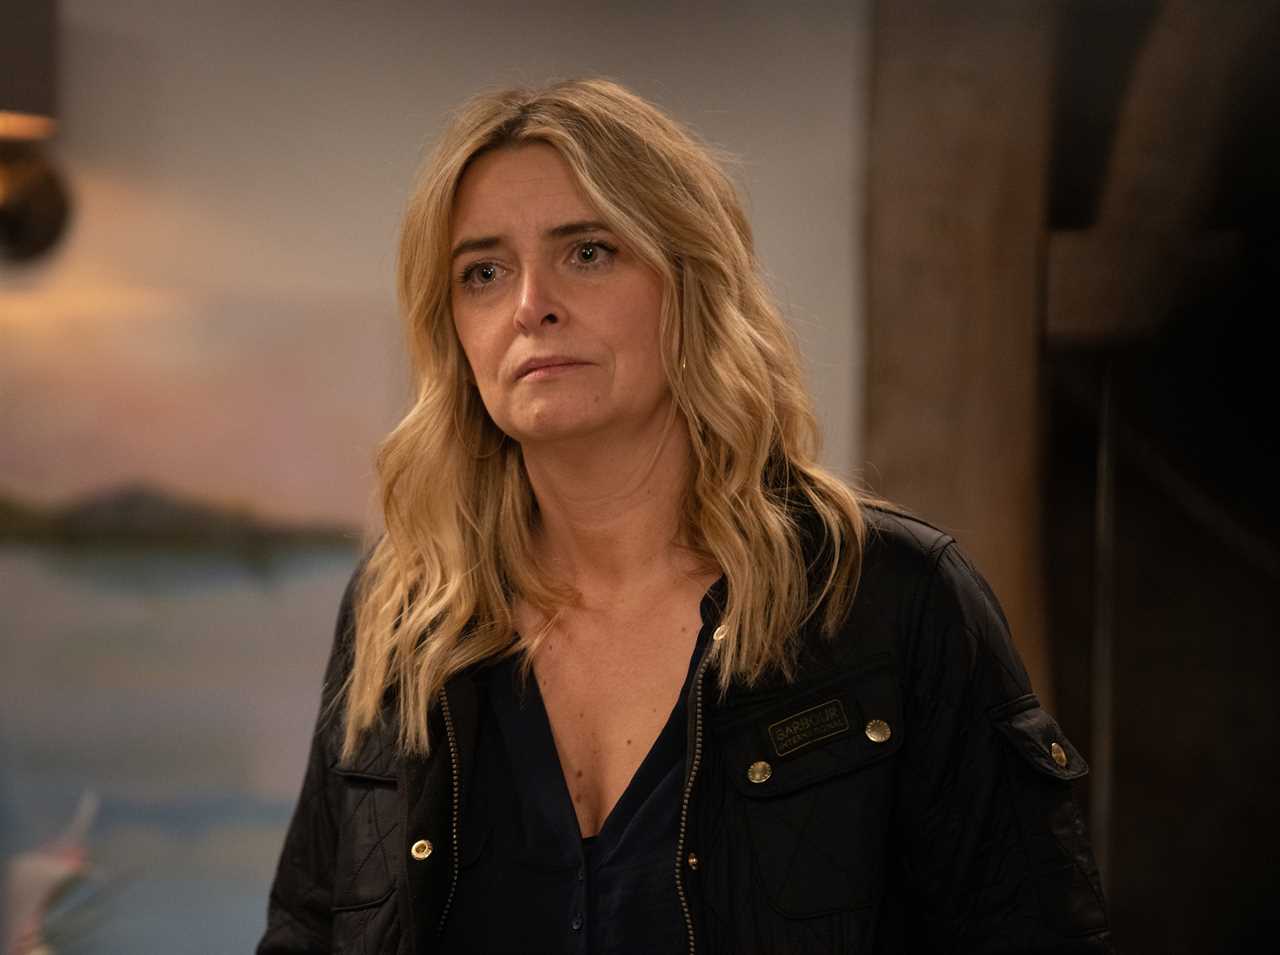 Seven devious ways Emmerdale’s Charity Dingle could get revenge on cheating Mackenzie Boyd